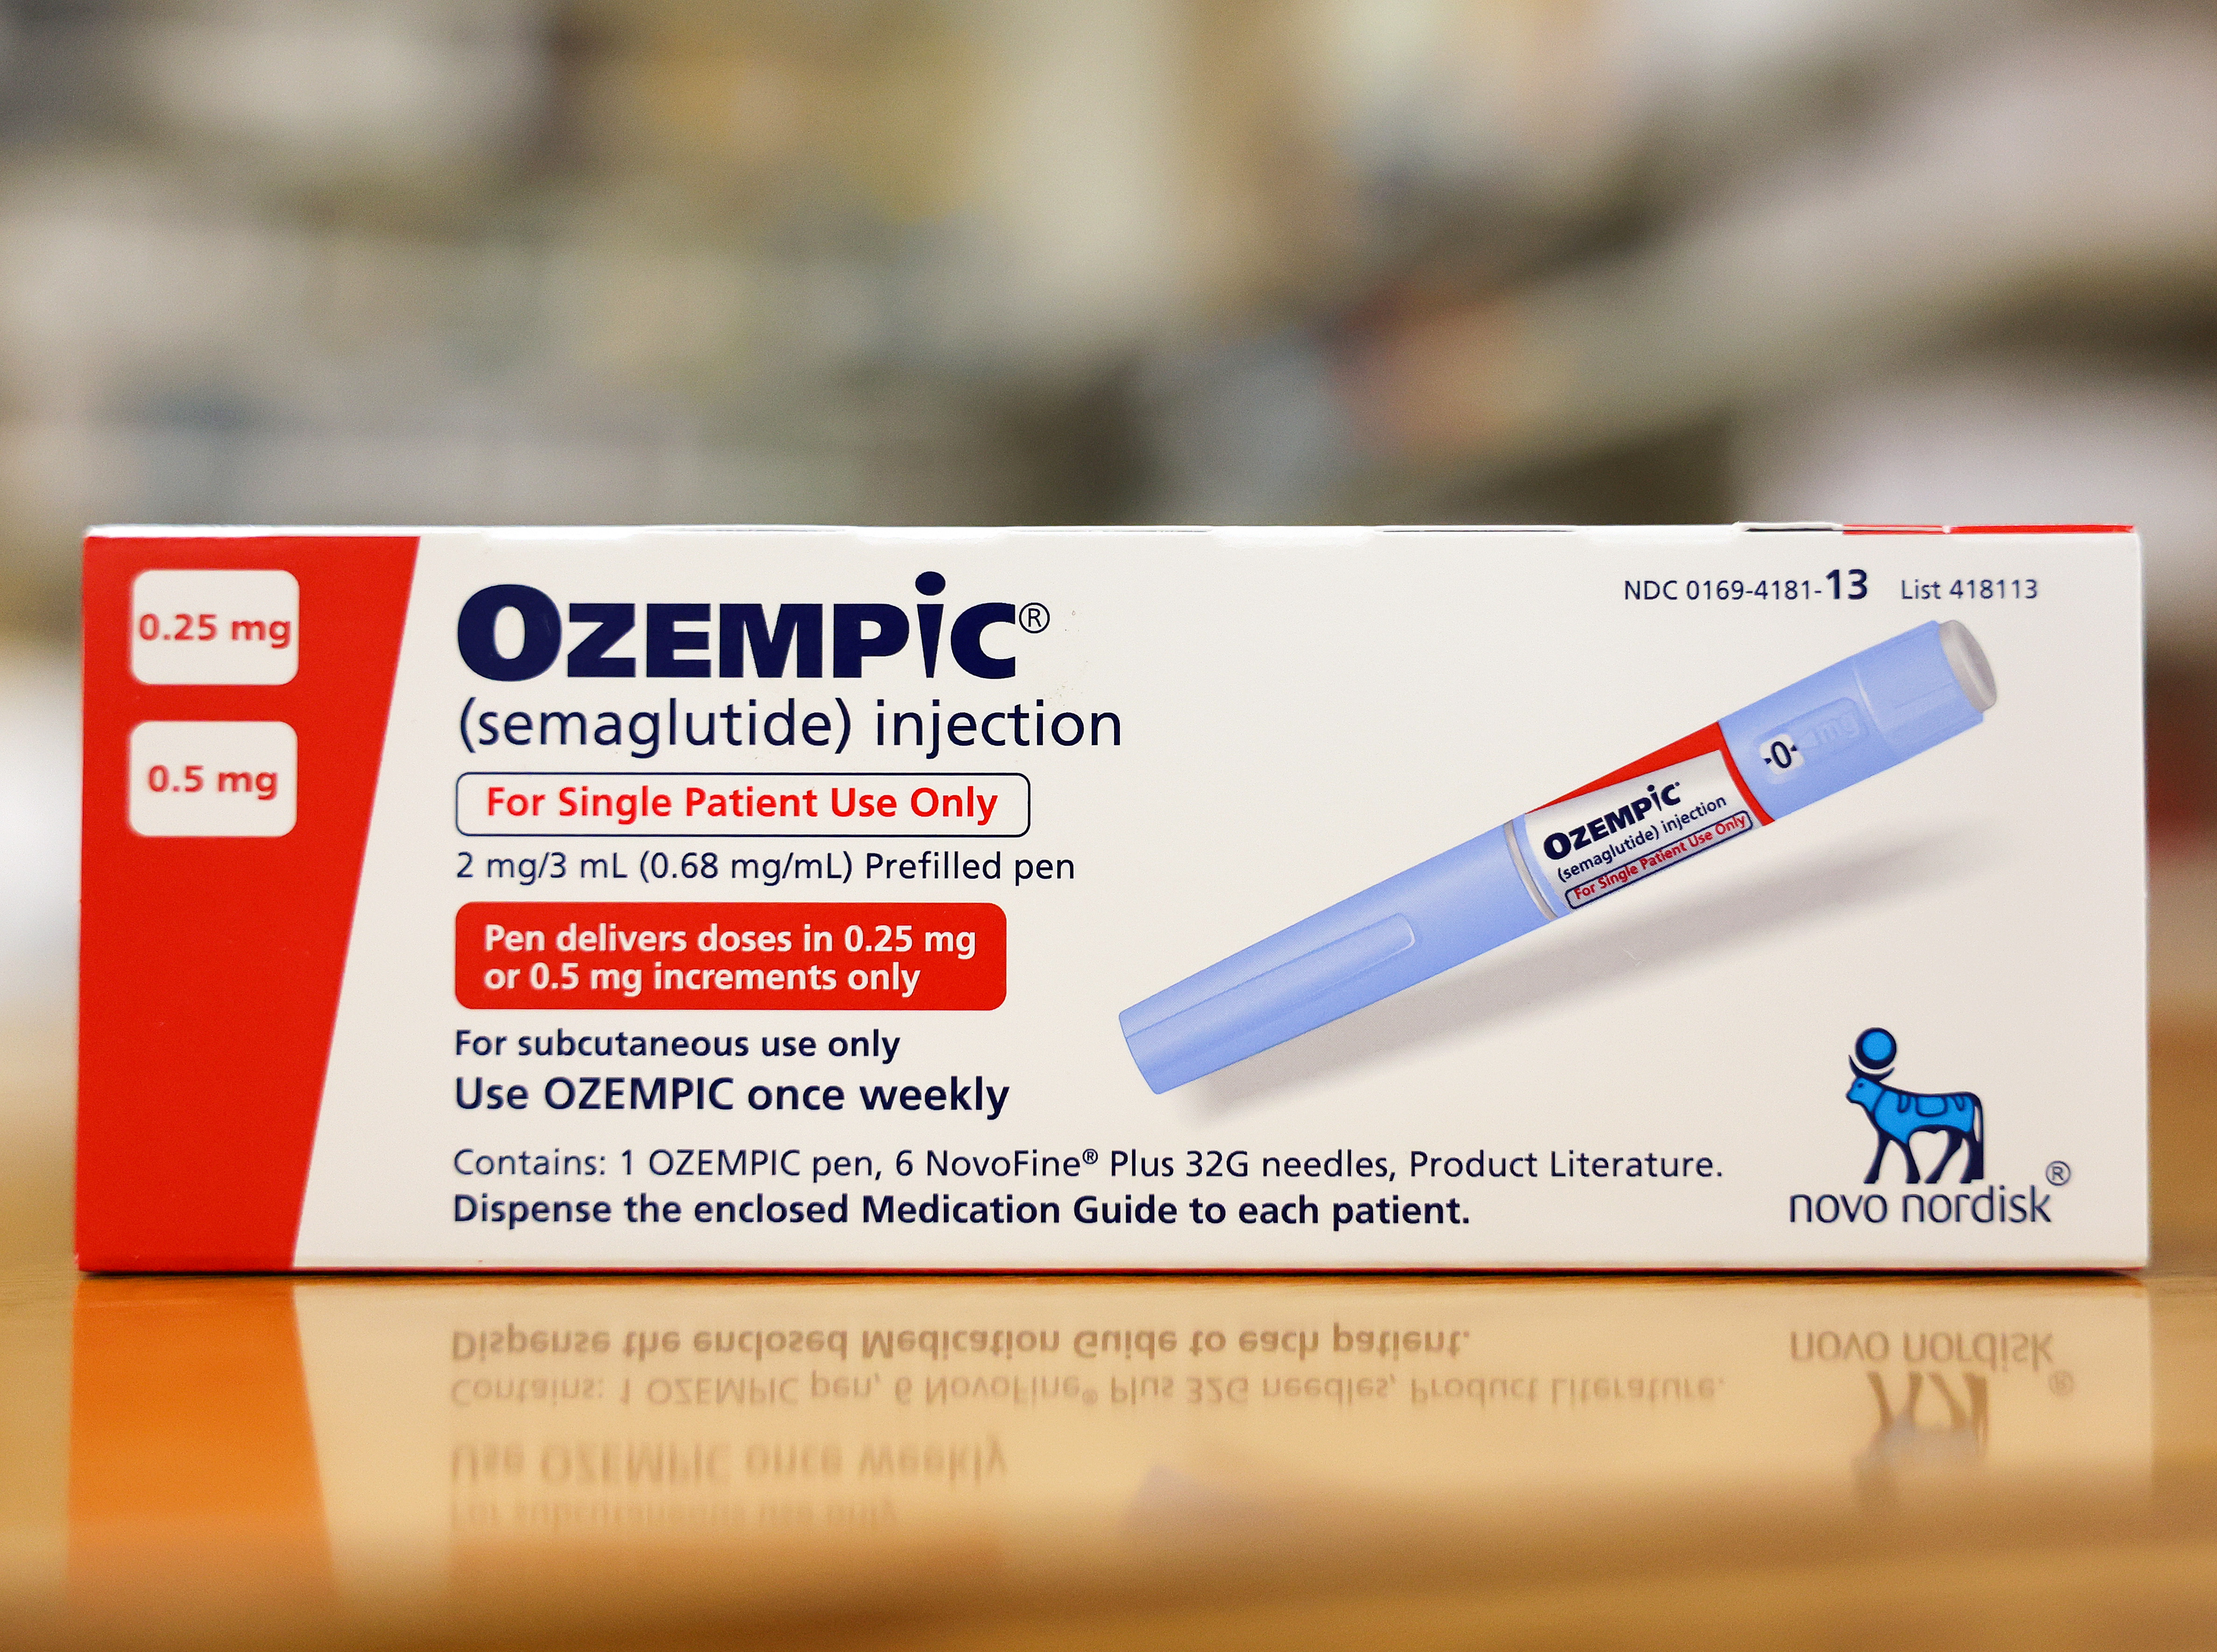 Ozempic among ‘bogus’ drug patents being challenged by U.S. to
spur competition